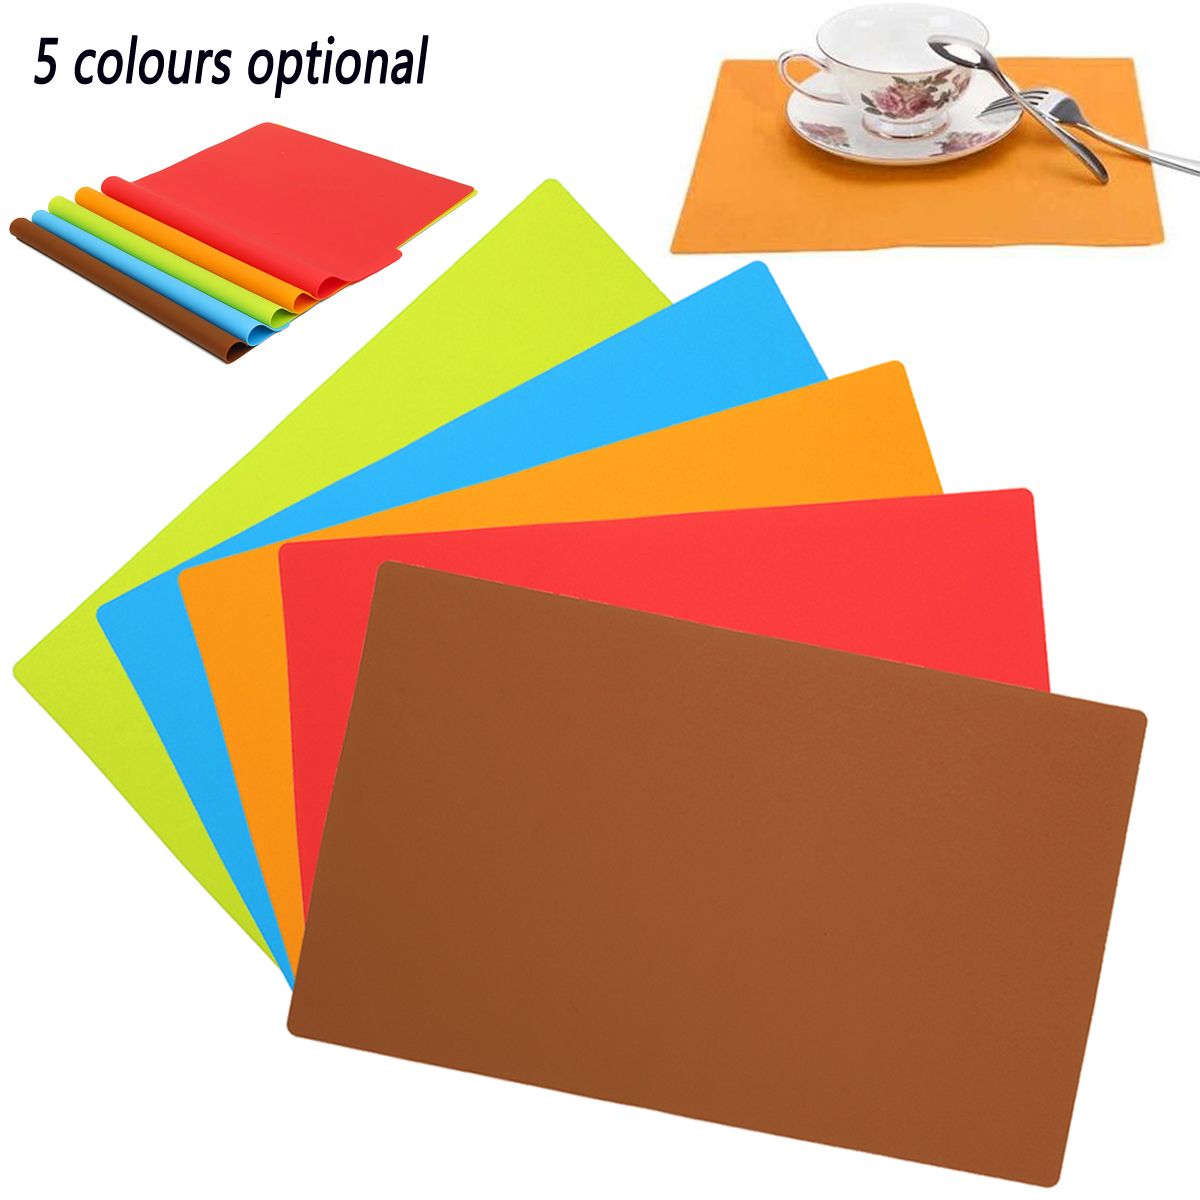 Silicone-Extra-Large-Thick-Baking-Mat-Oven-Tray-Liner-Cake-Pizza-Pie-Bakeware-Nonstick-Rolling-Sheet-1378513